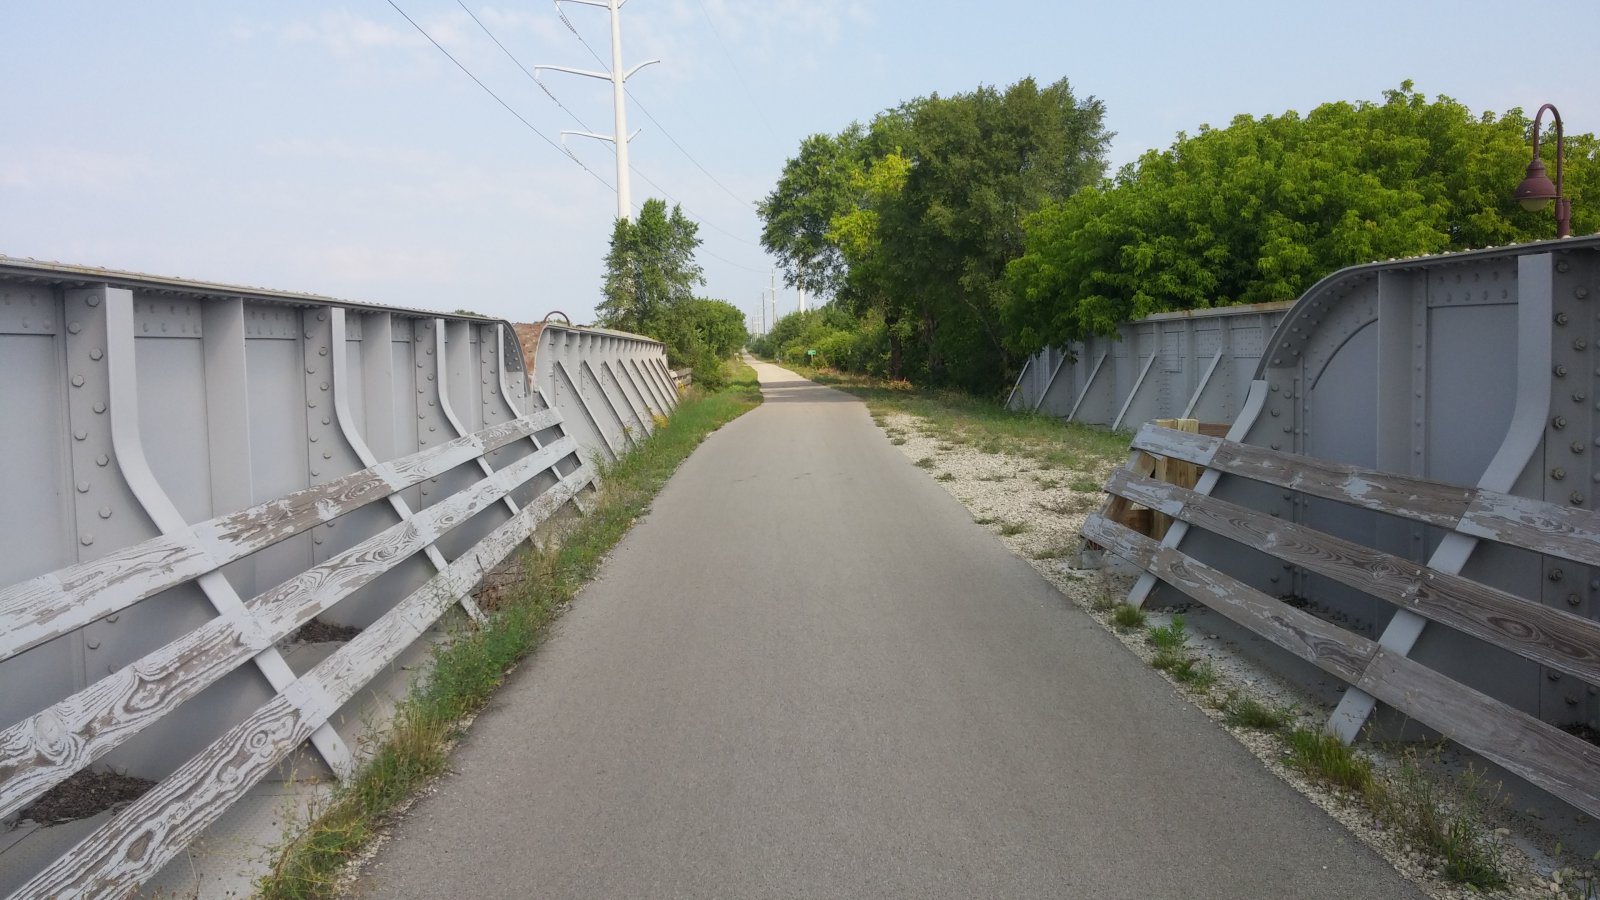 The Chicago and North Western Railway route is now part of the Oak Leaf Trail